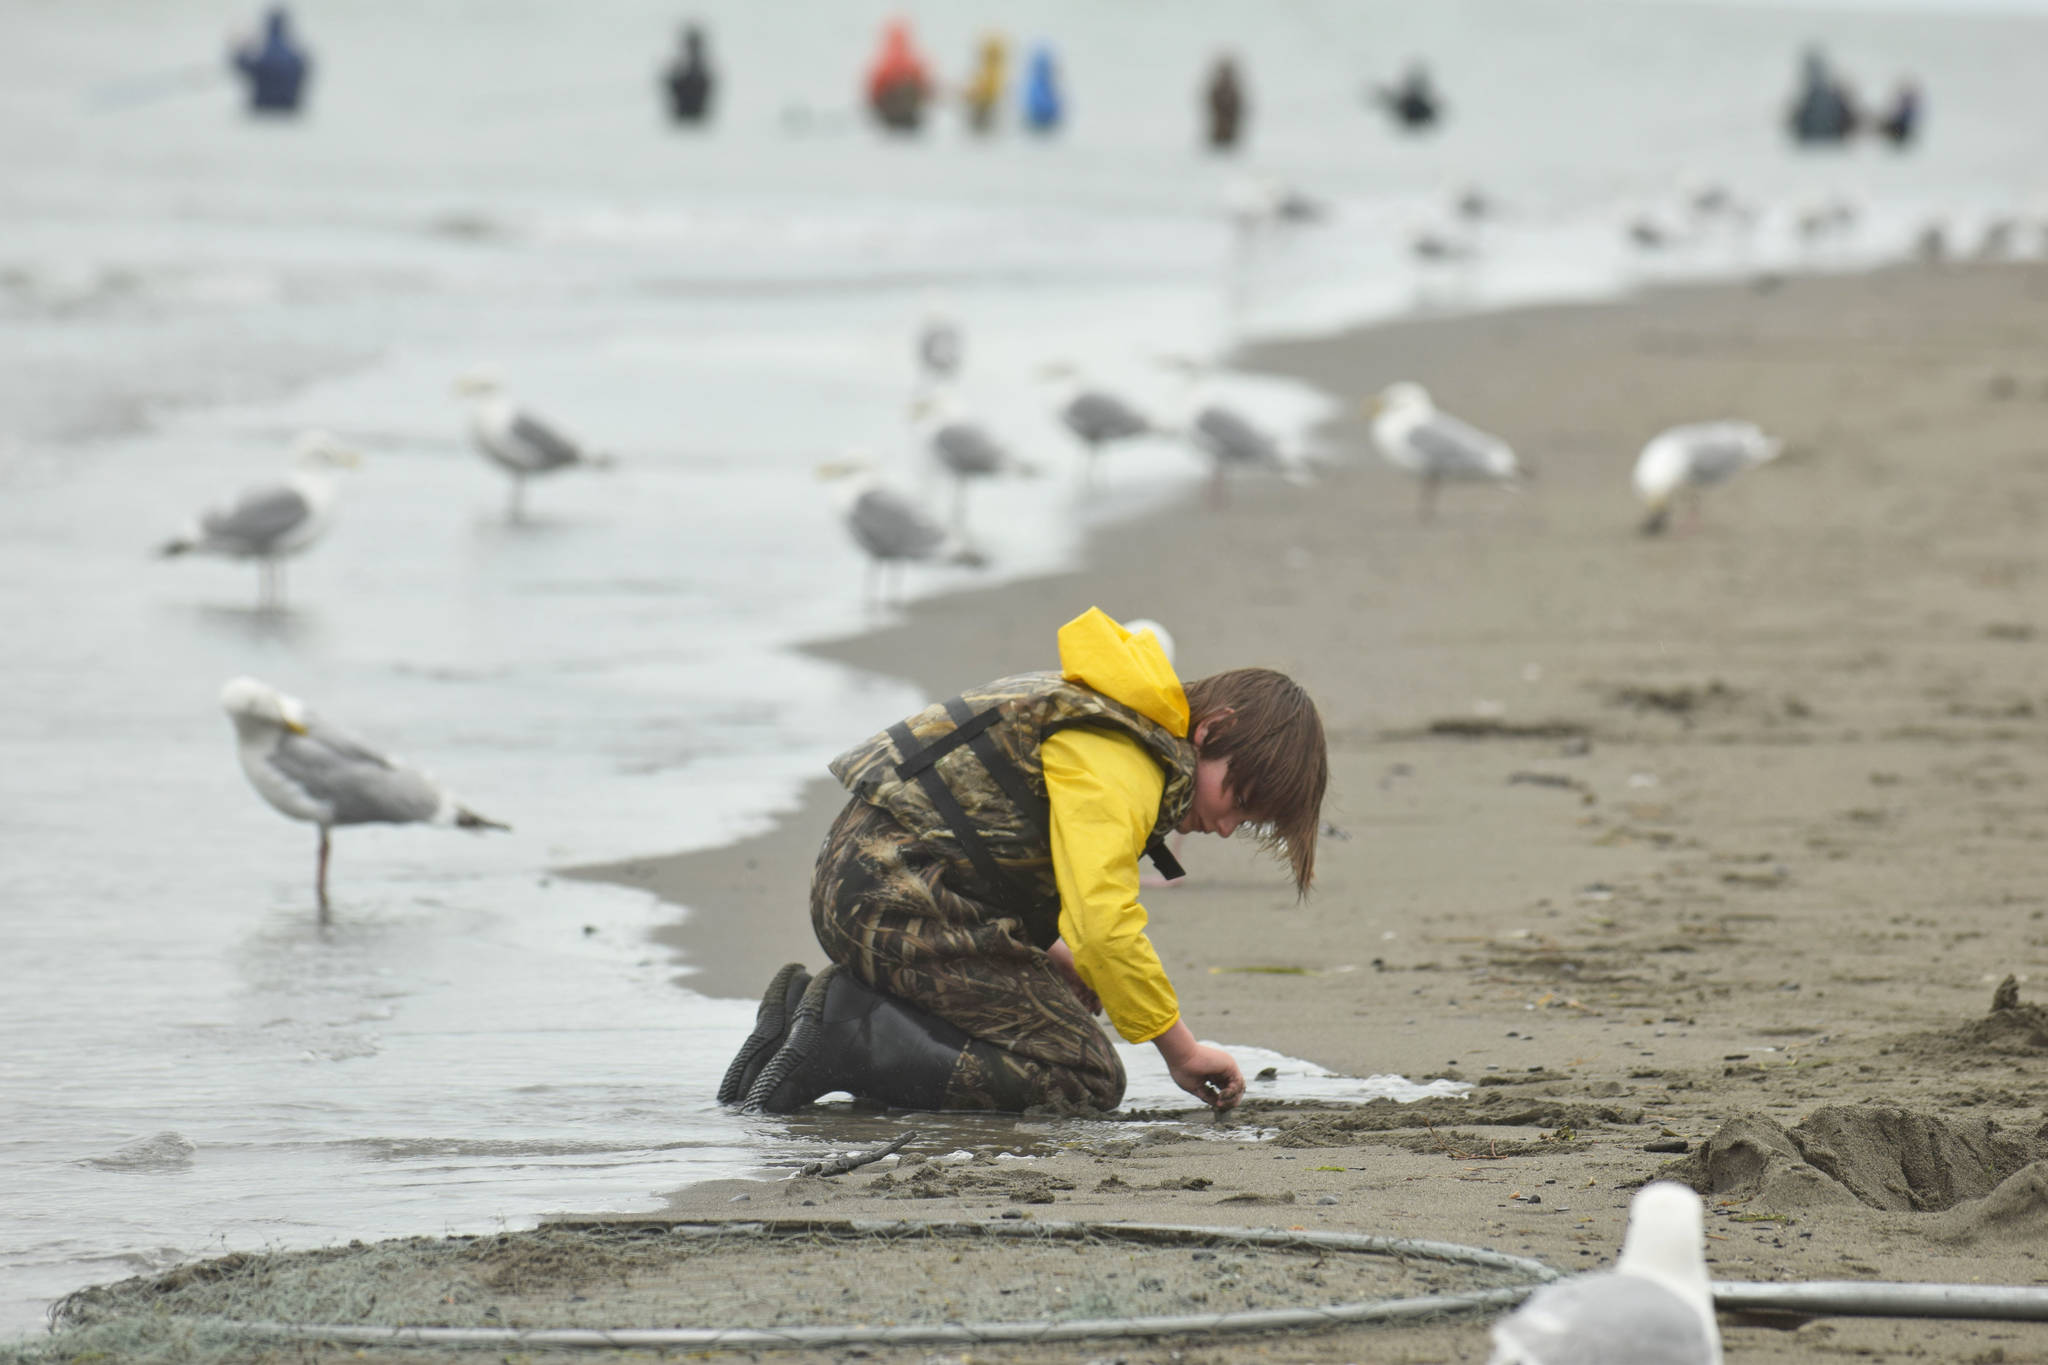 A young boy distracts himself in the Kenai Beach sand on Tuesday, July 10, 2018, during the first day of the dipnetting season. (Photo by Erin Thompson/Peninsula Clarion)